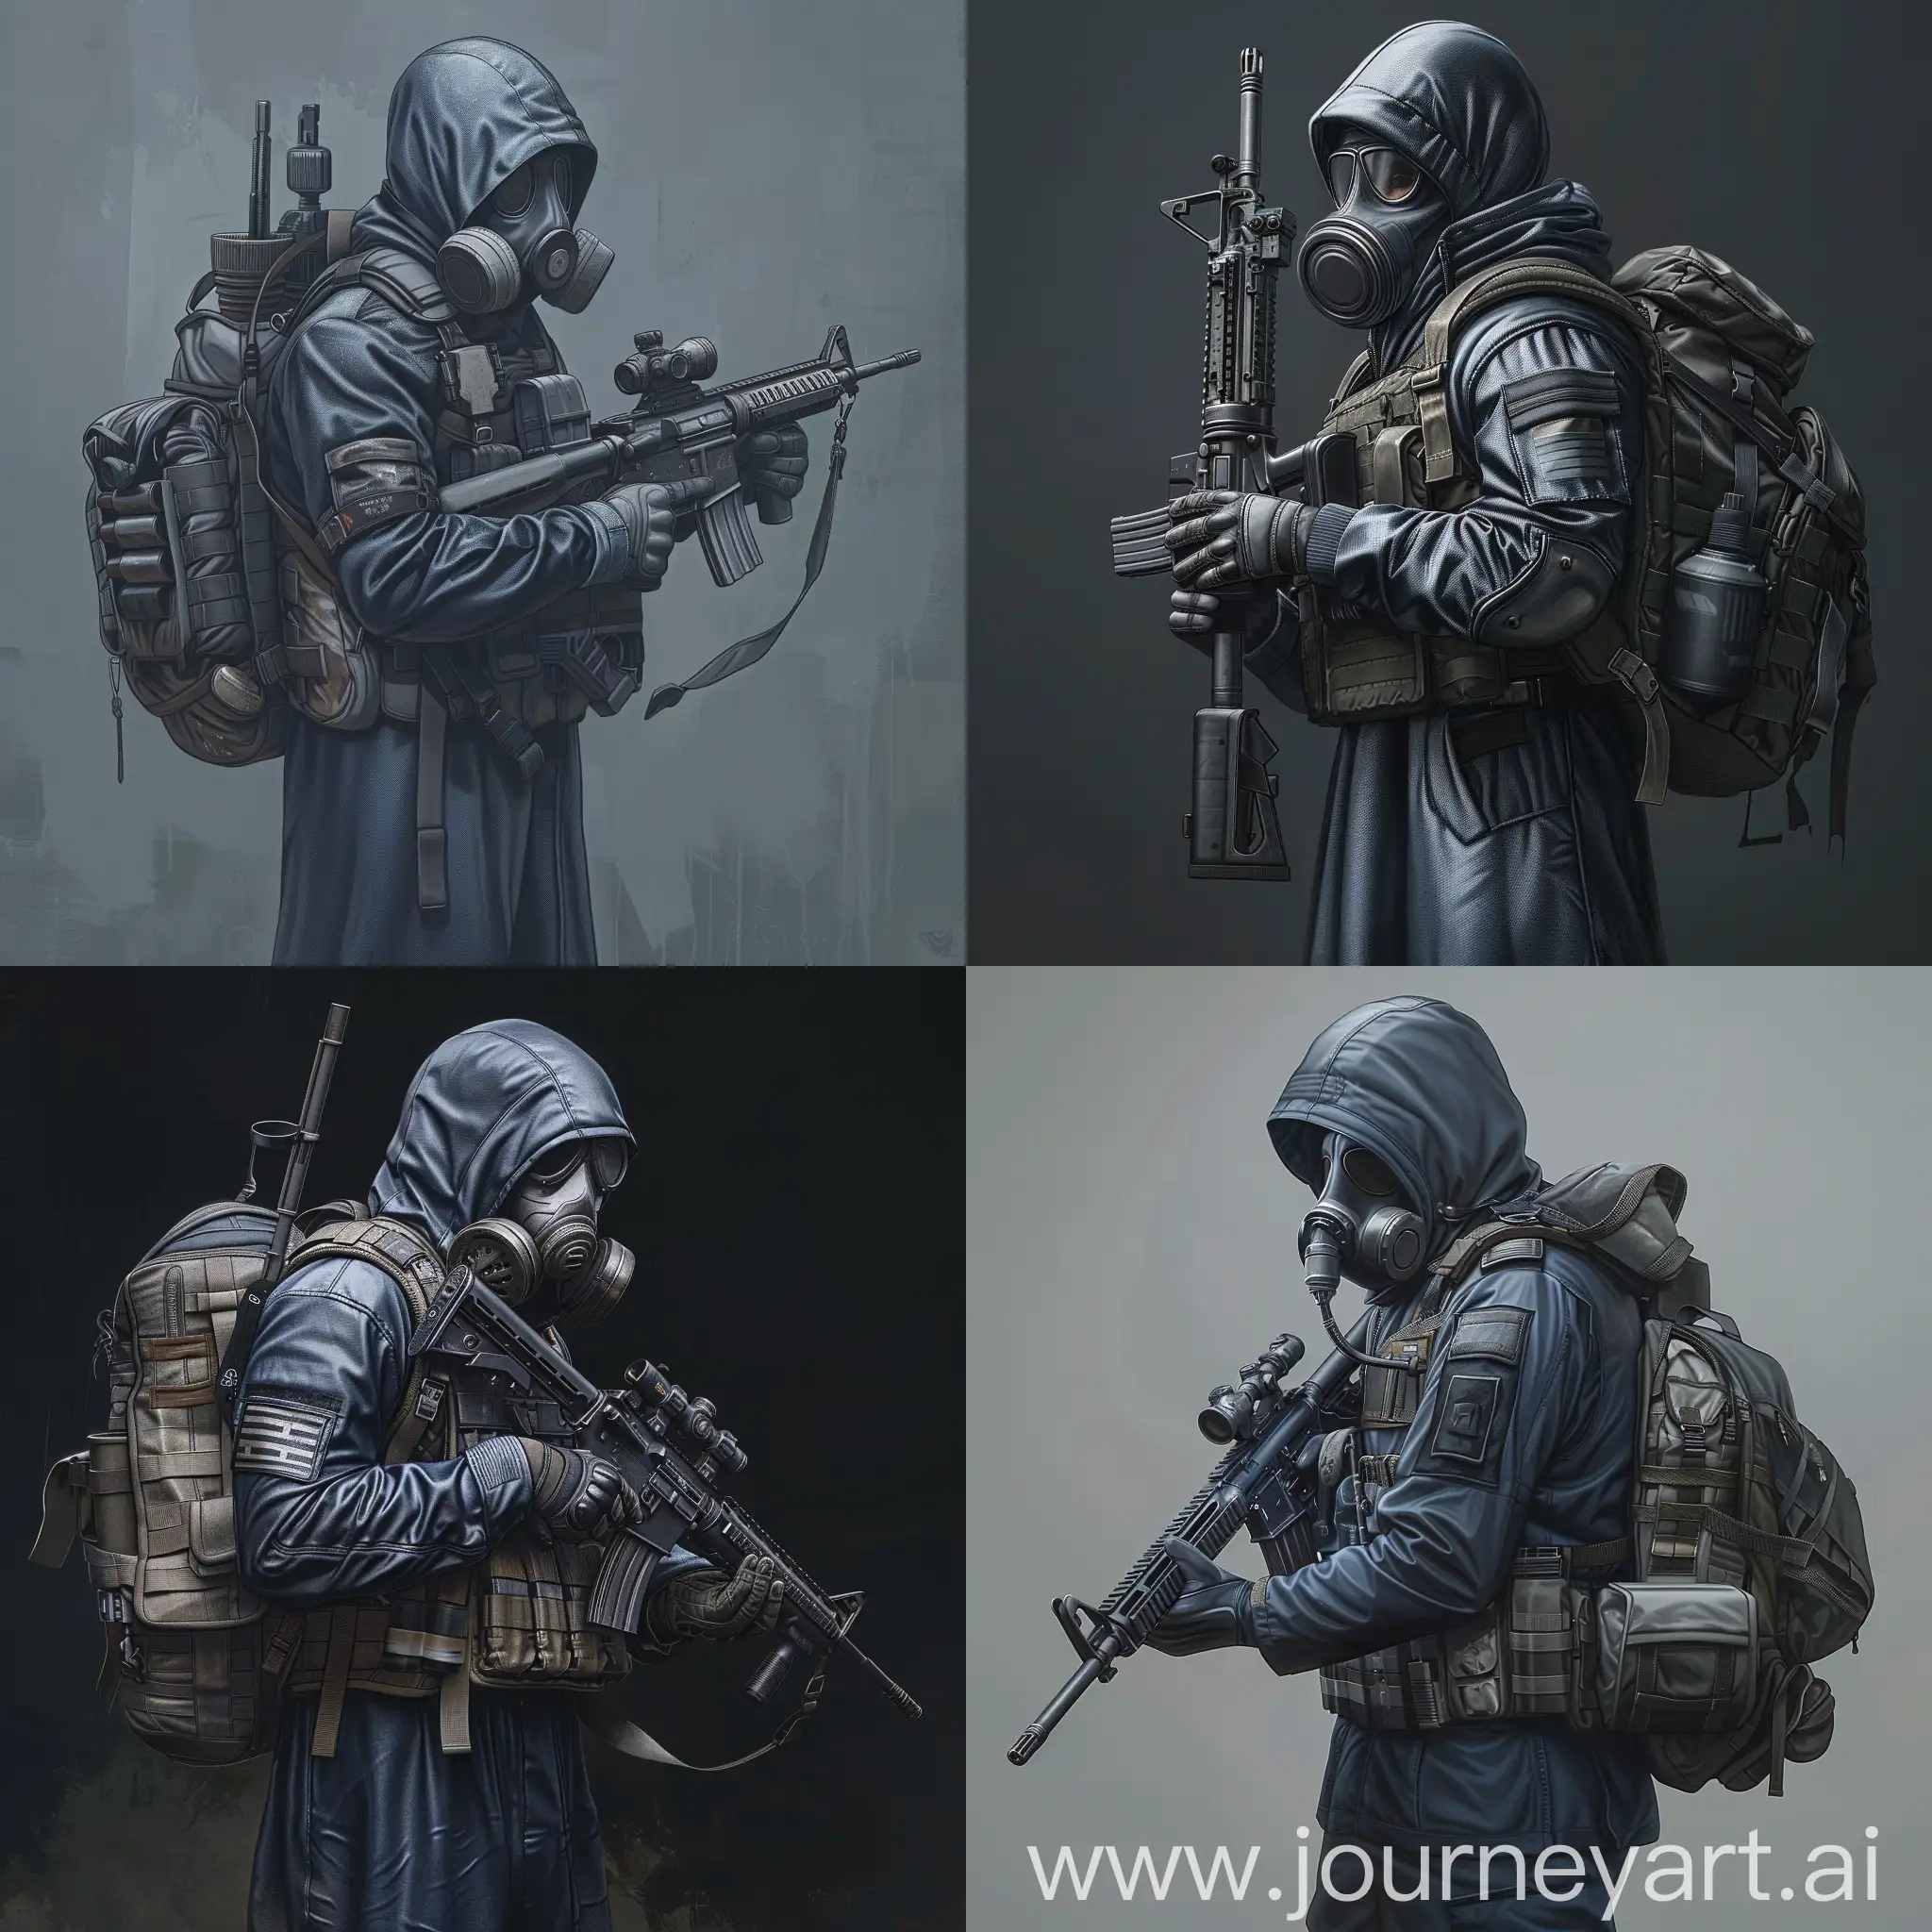 Digital design character, a mercenary from the universe of S.T.A.L.K.E.R., dressed in a dark blue military raincoat, gray military armor on his body, a gasmask on his face, a military backpack on his back, a rifle in his hands.